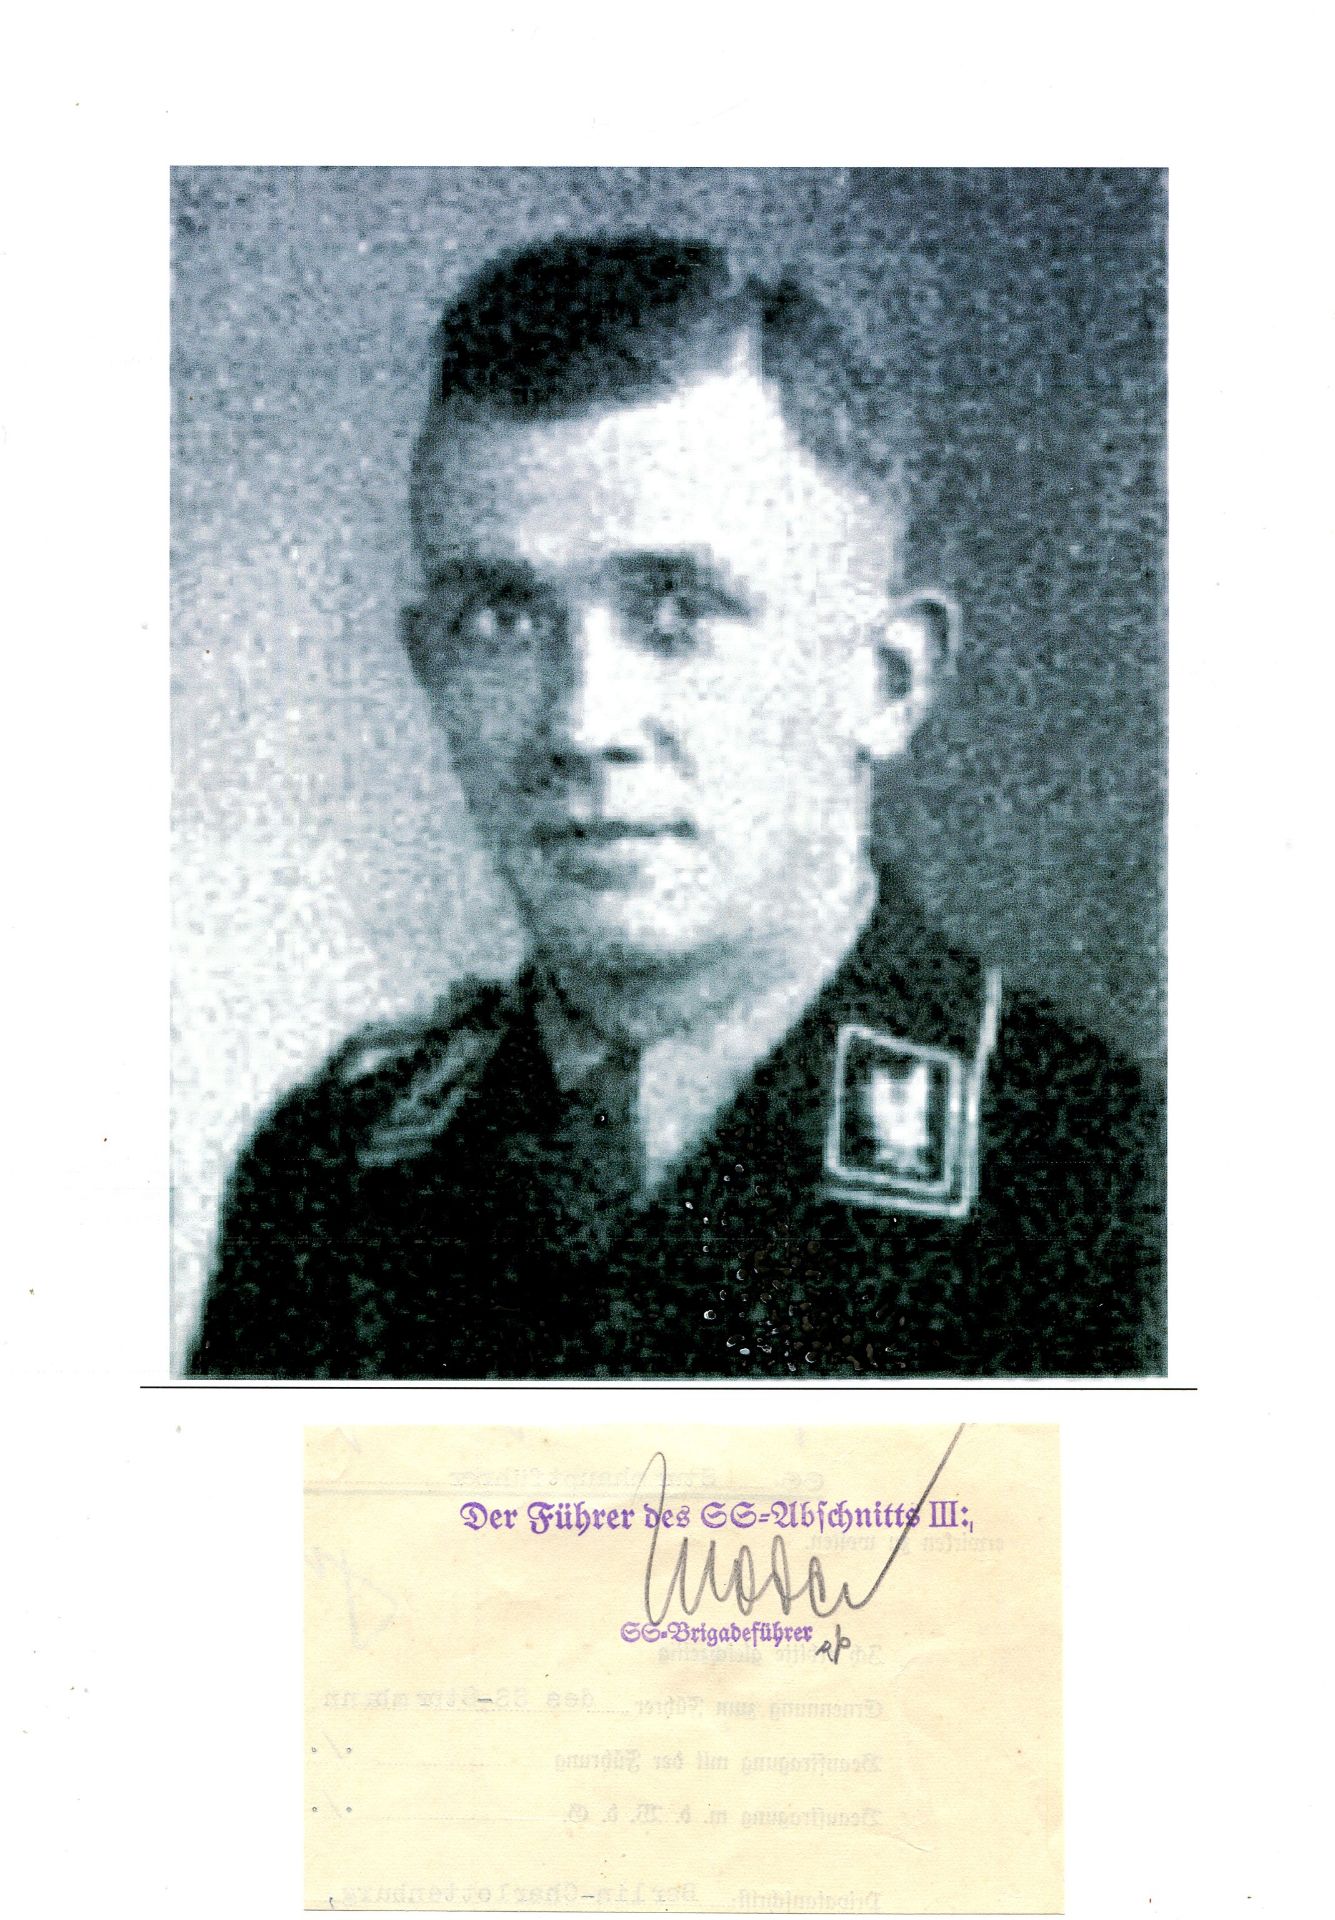 MODER PAUL: (1896-1942) German SS-Gruppenfuhrer of World War II who served as the SS and Police